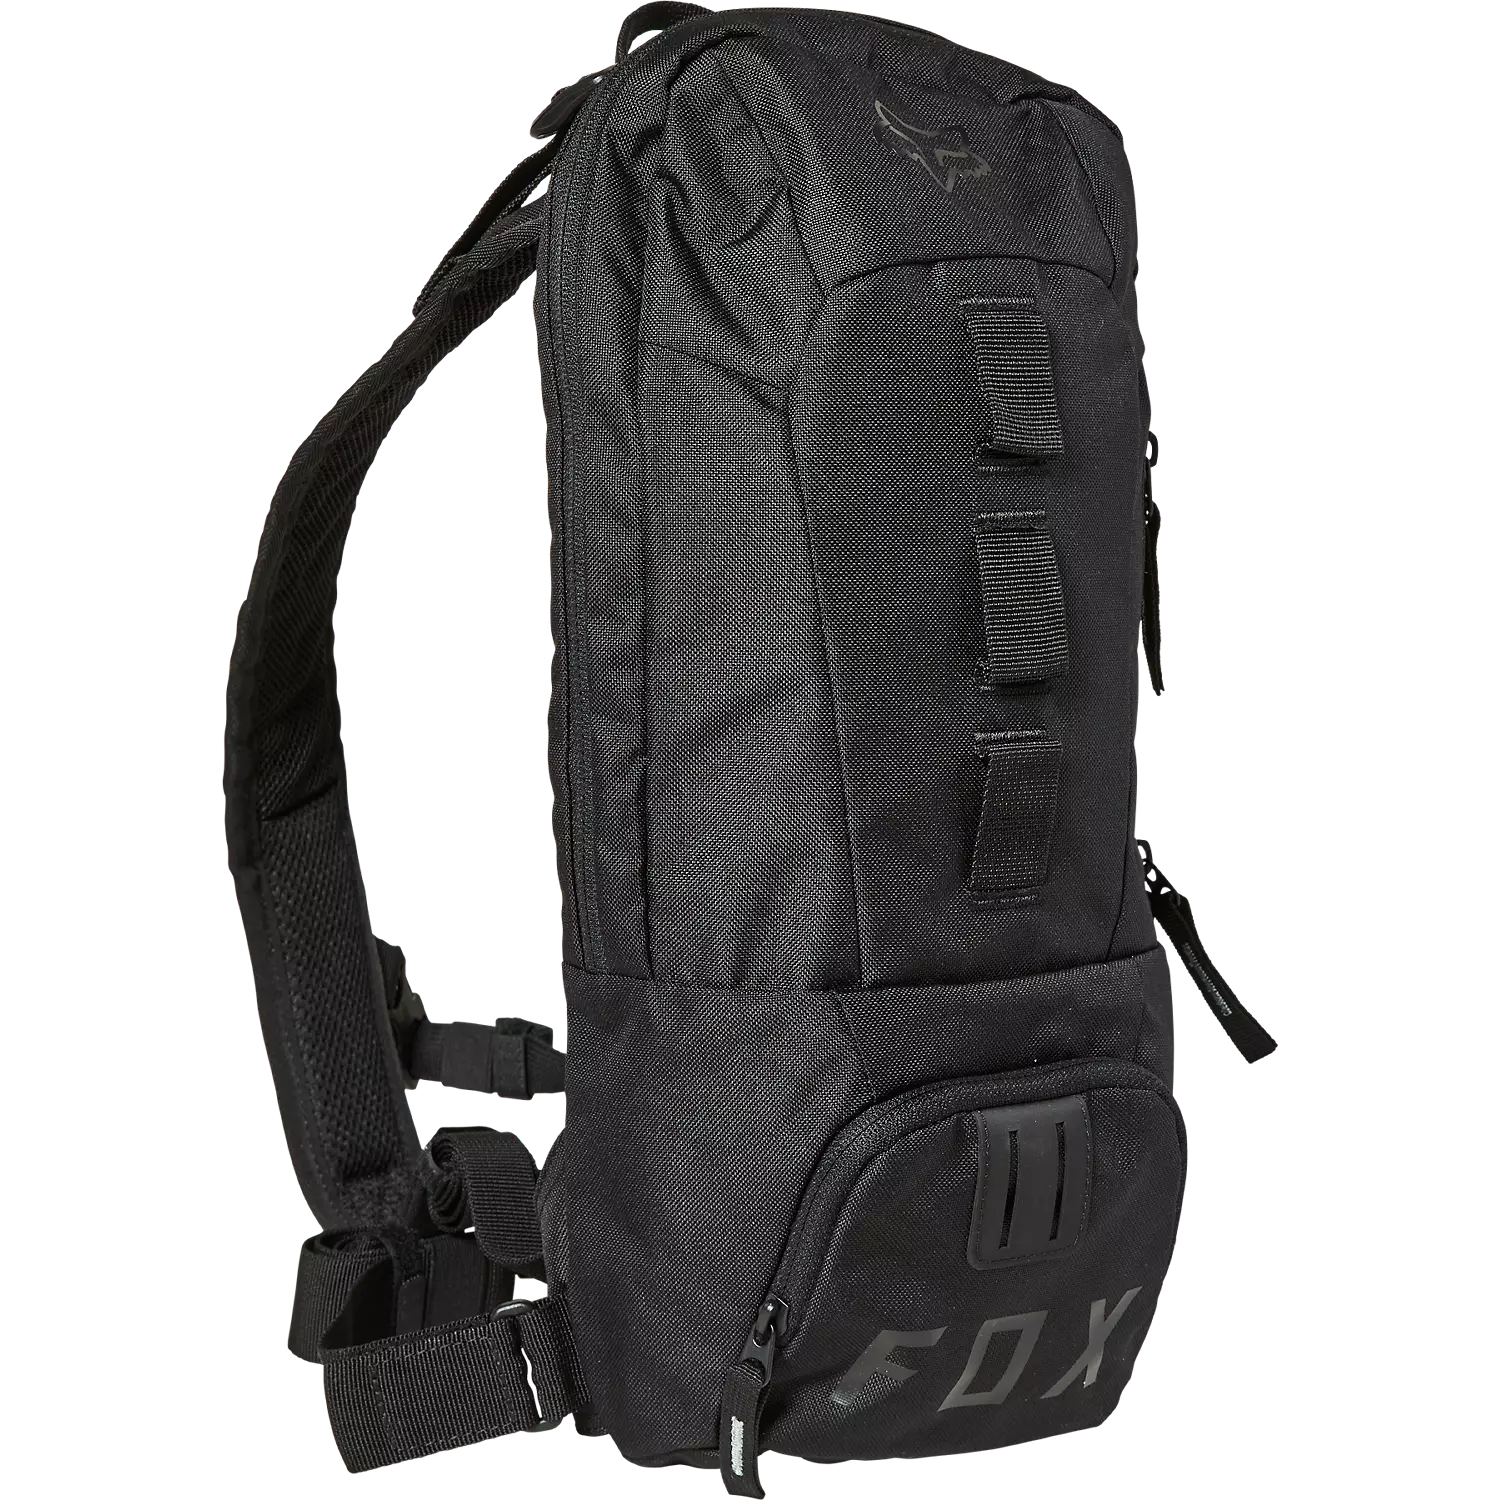 UTILITY 6L HYDRATION PACK SMALL BLACK